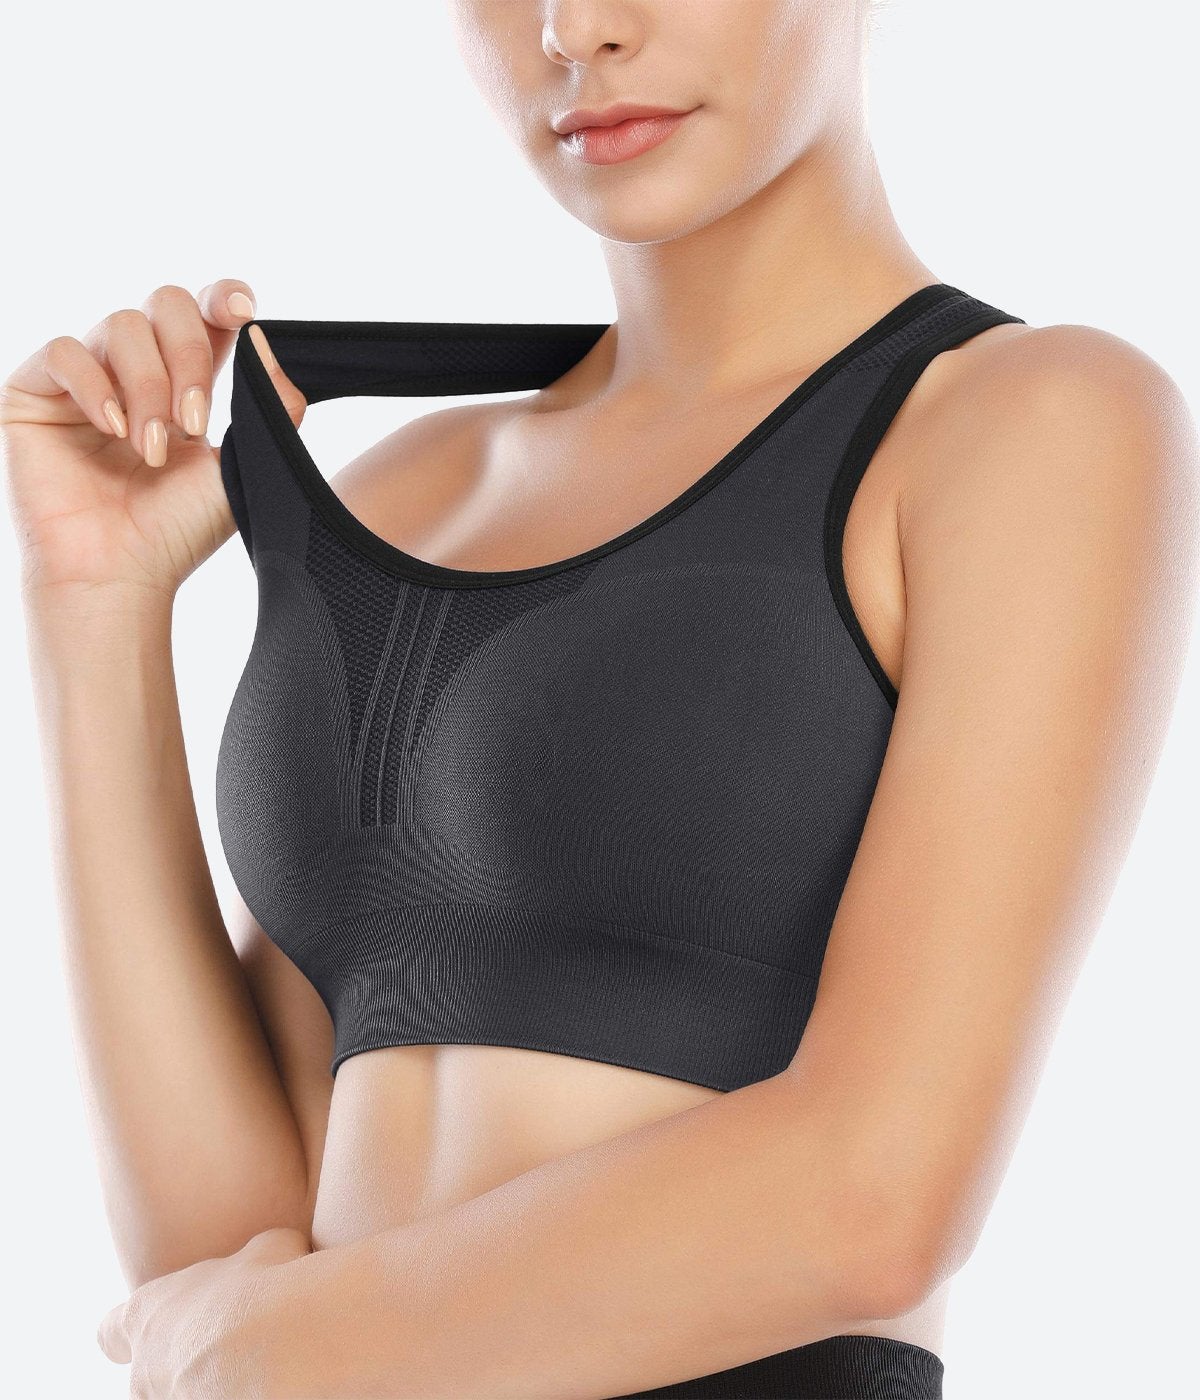 3-6 Women's Sport Bras Yoga Racer Back Molded Cup Wire free High Impact Bra  6816